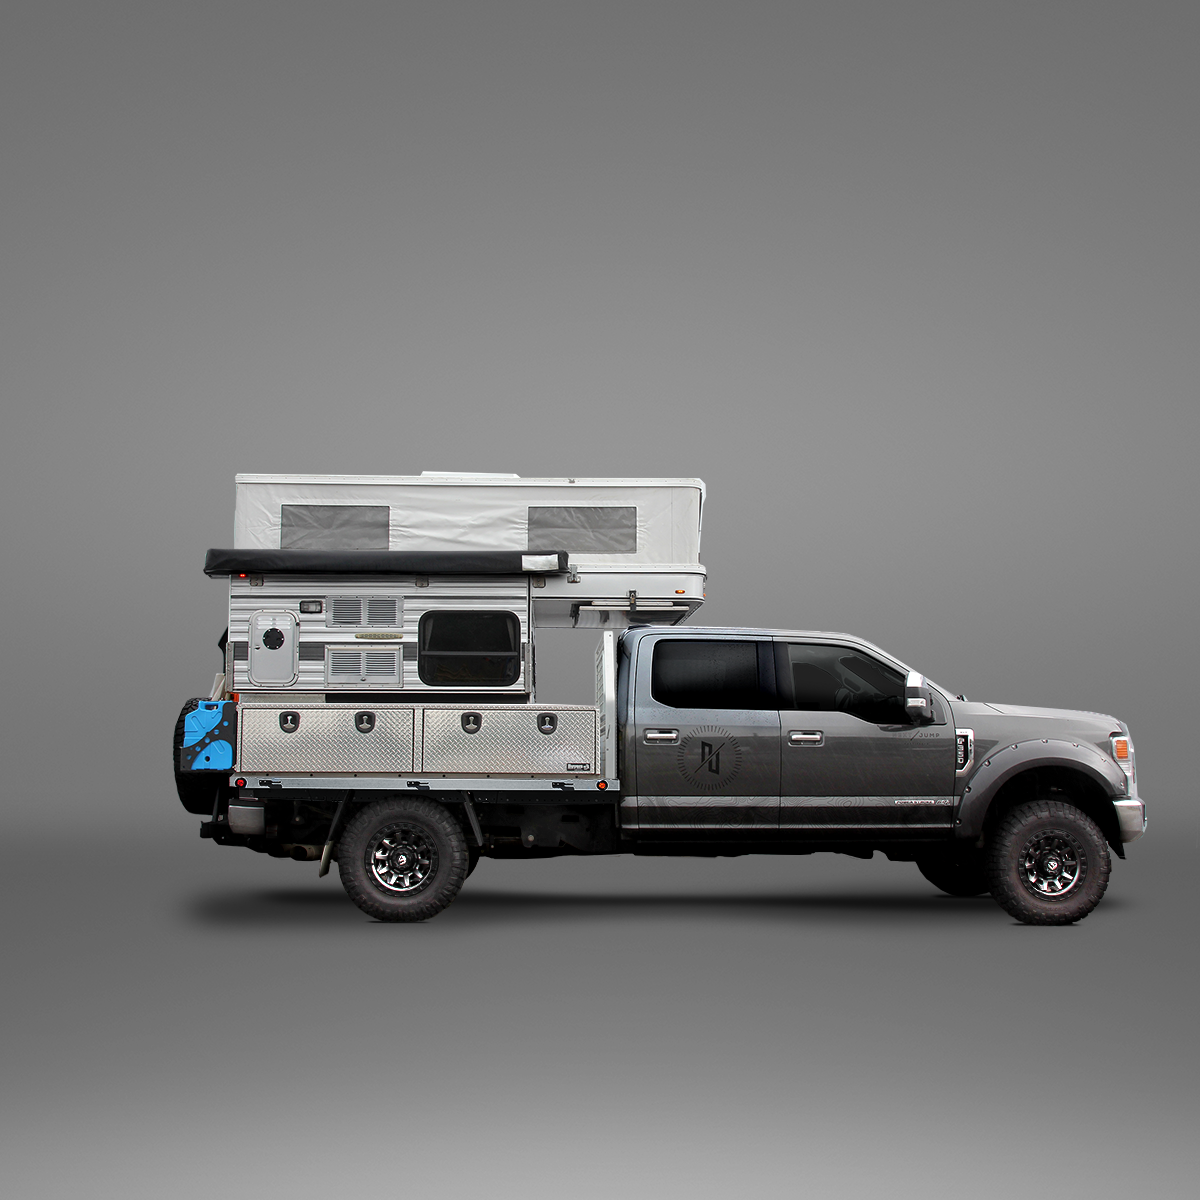 Next Jump Outfitters transforms factory truck bed into a modular, overland flatbed tray system